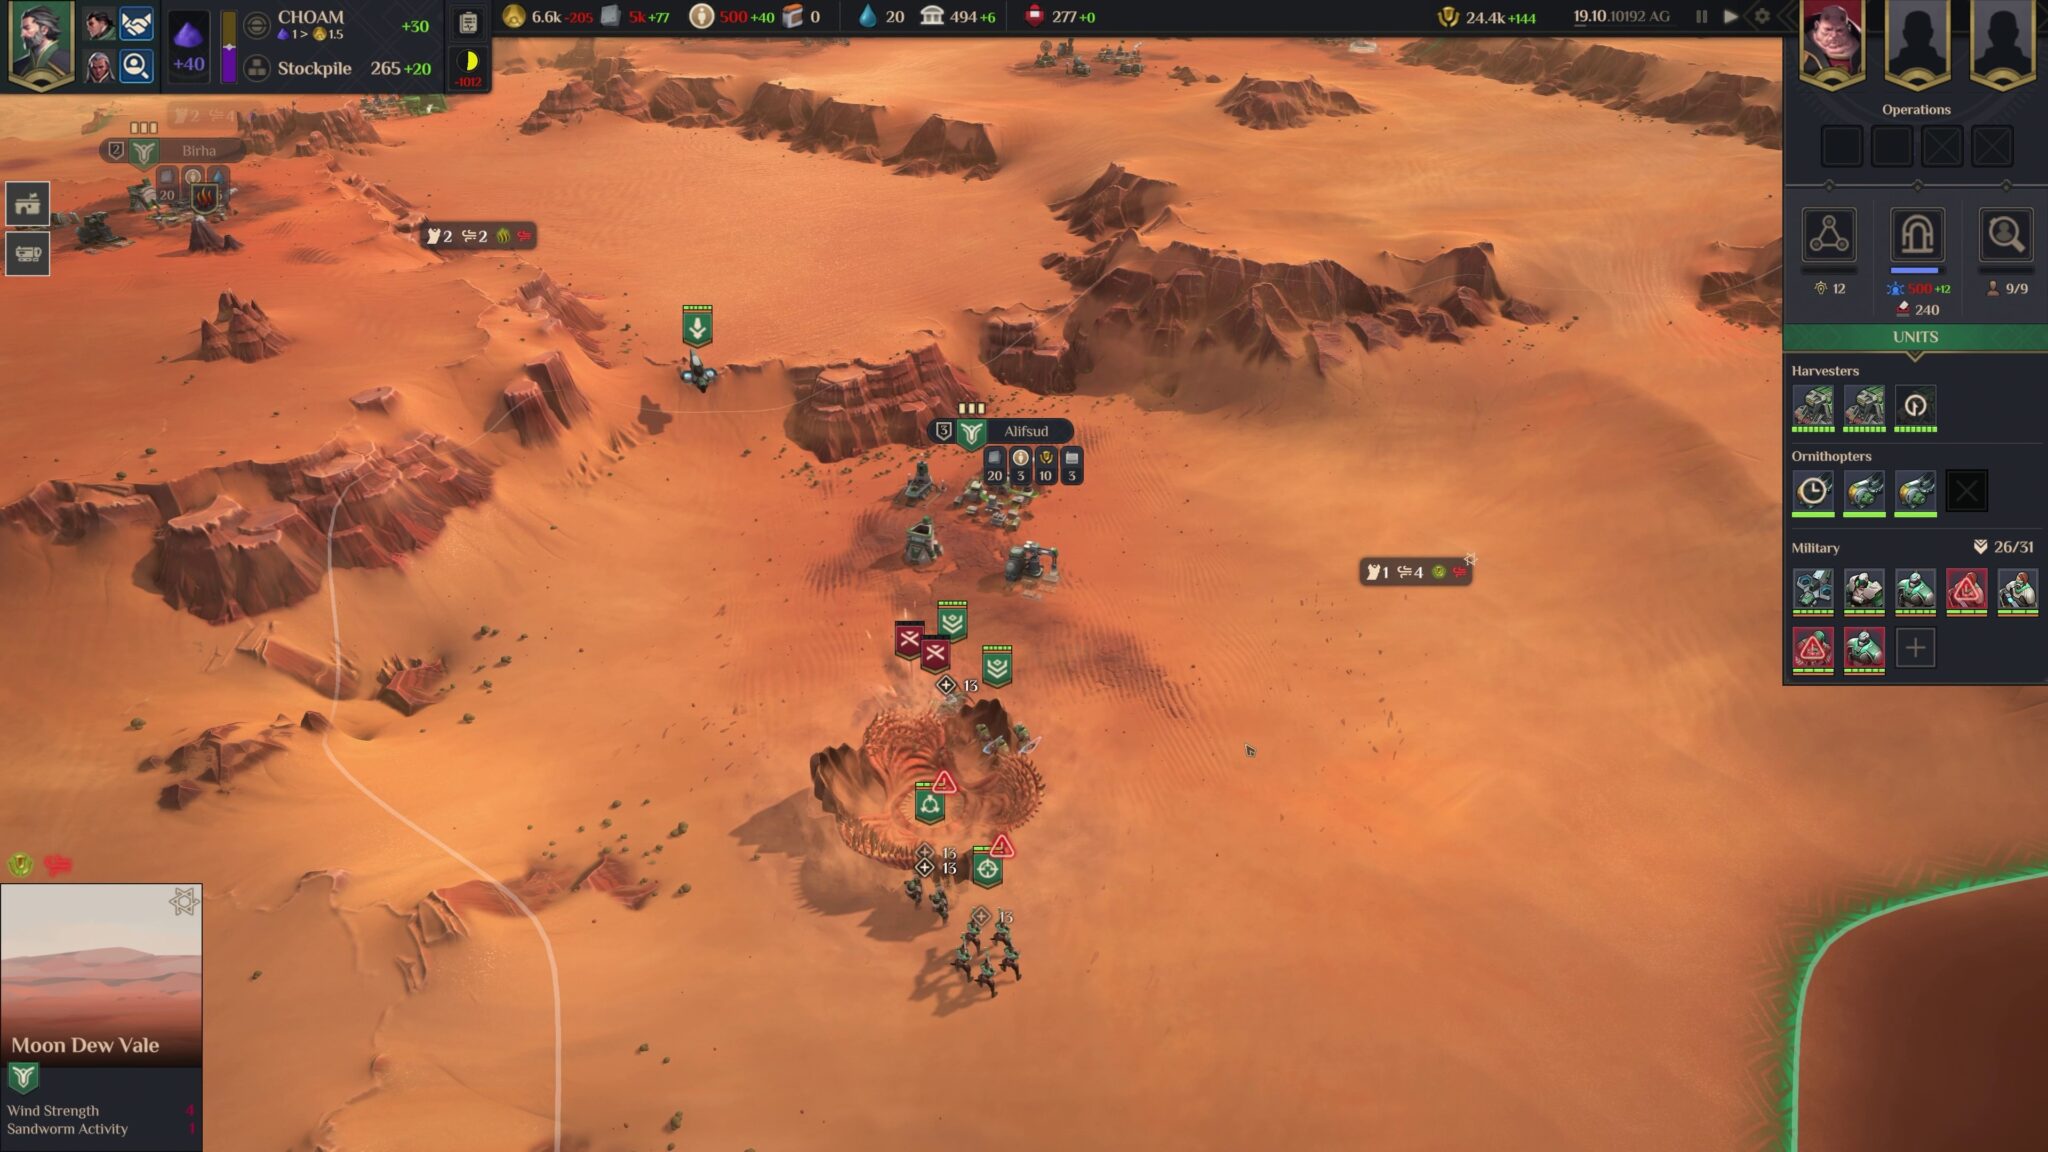 If you're not careful, you can easily become worm food during battles in the desert.